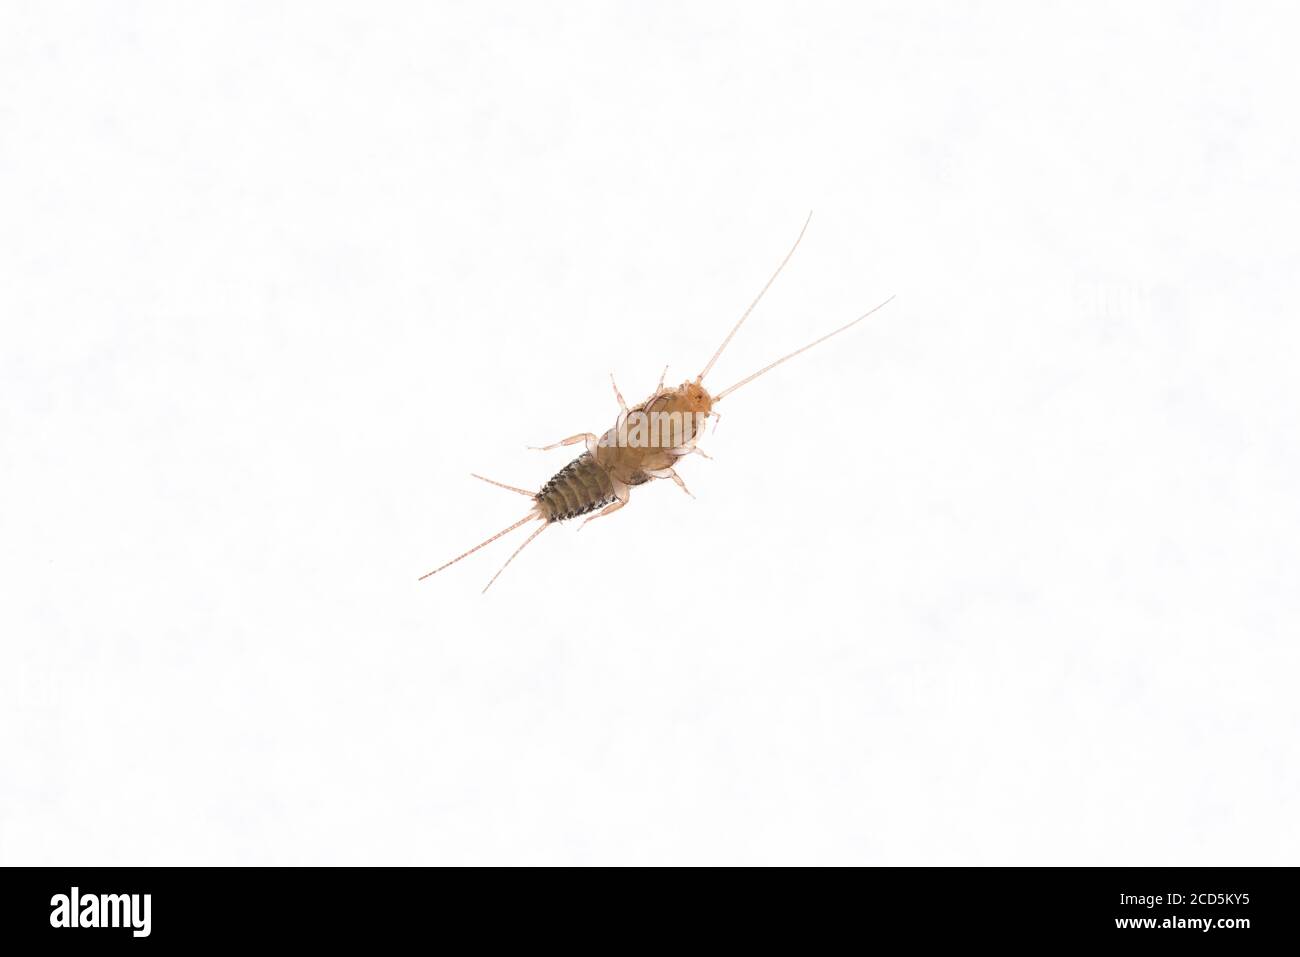 Bottom view of a Firebrat (Thermobia domestica), a species of silverfish. Insect Lepisma saccharina in normal habitat. Stock Photo